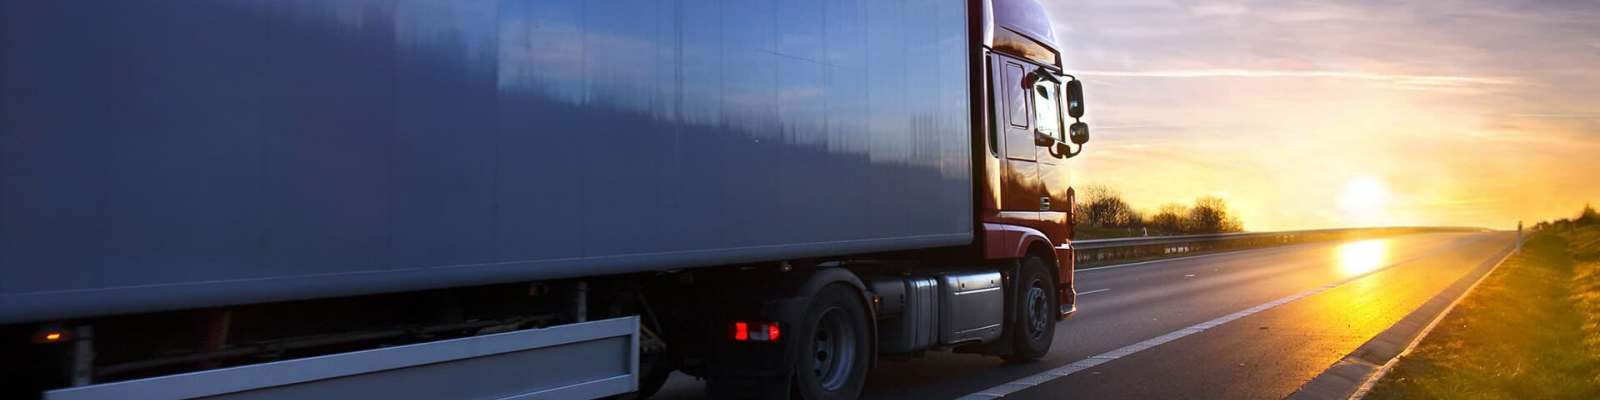 Car Transport Services In Bangalore - Vehicle Shift